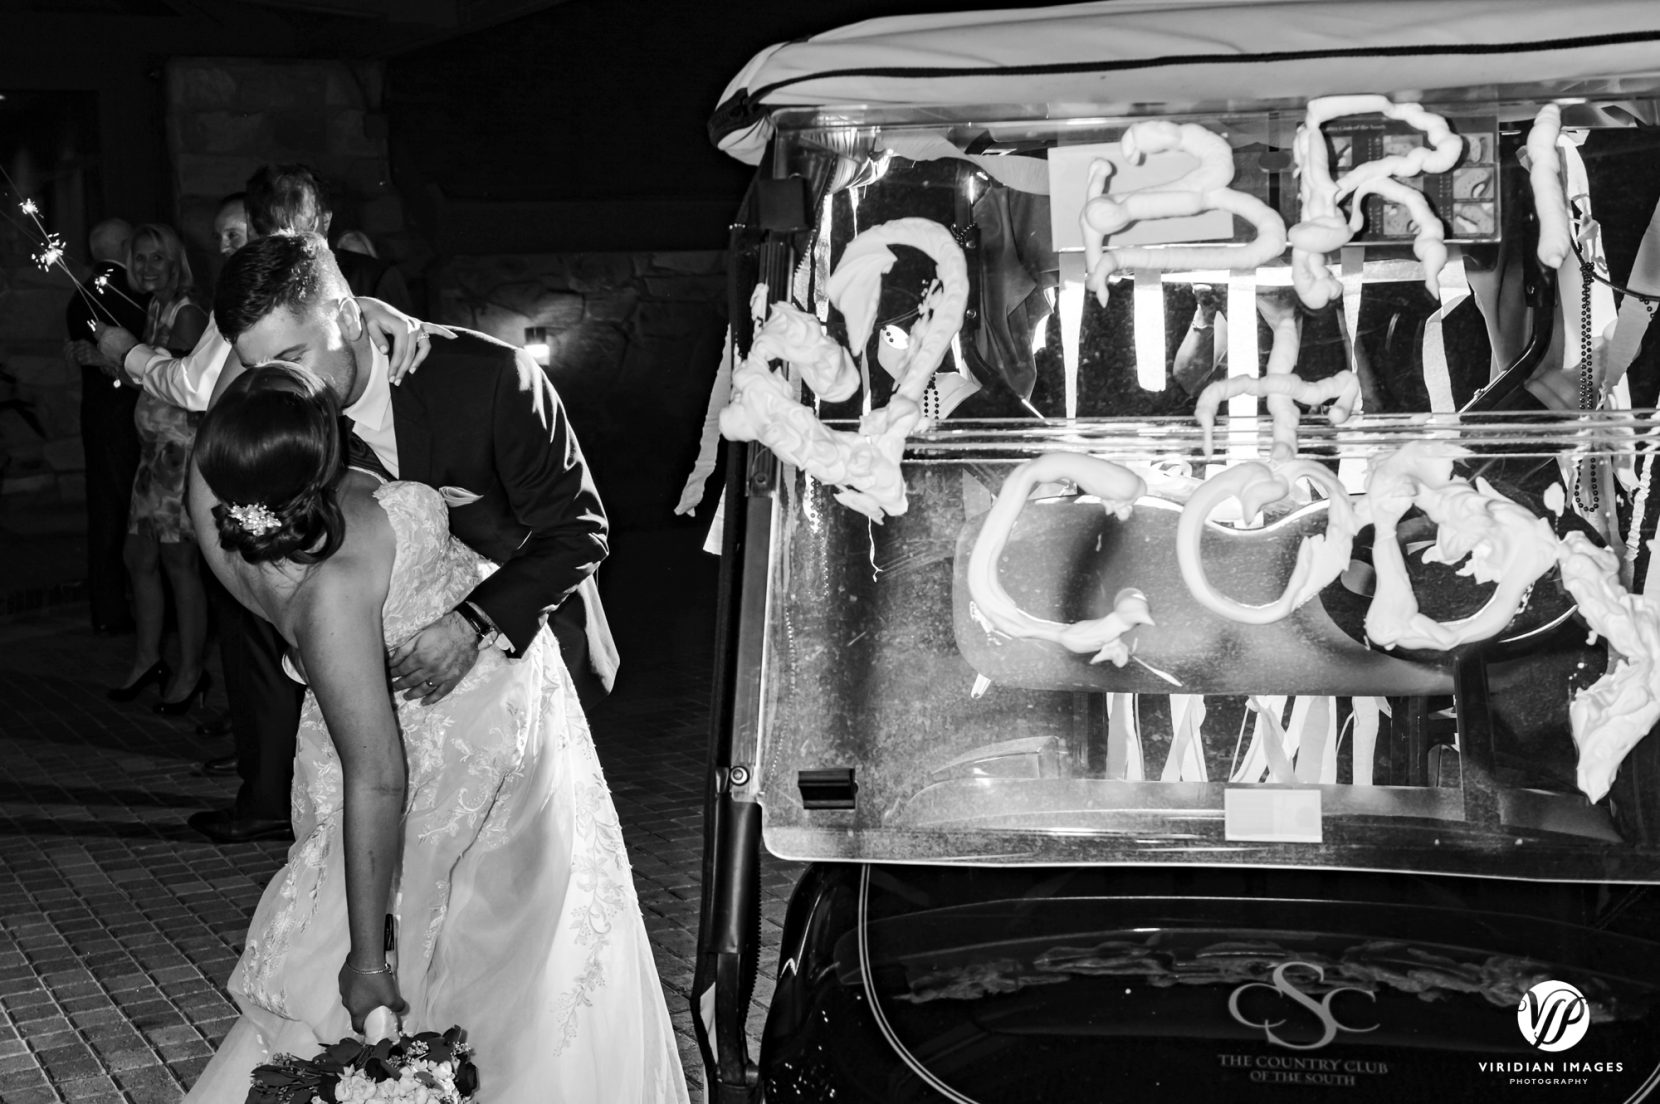 wedding exit sparkler and golf cart and shaving cream writing